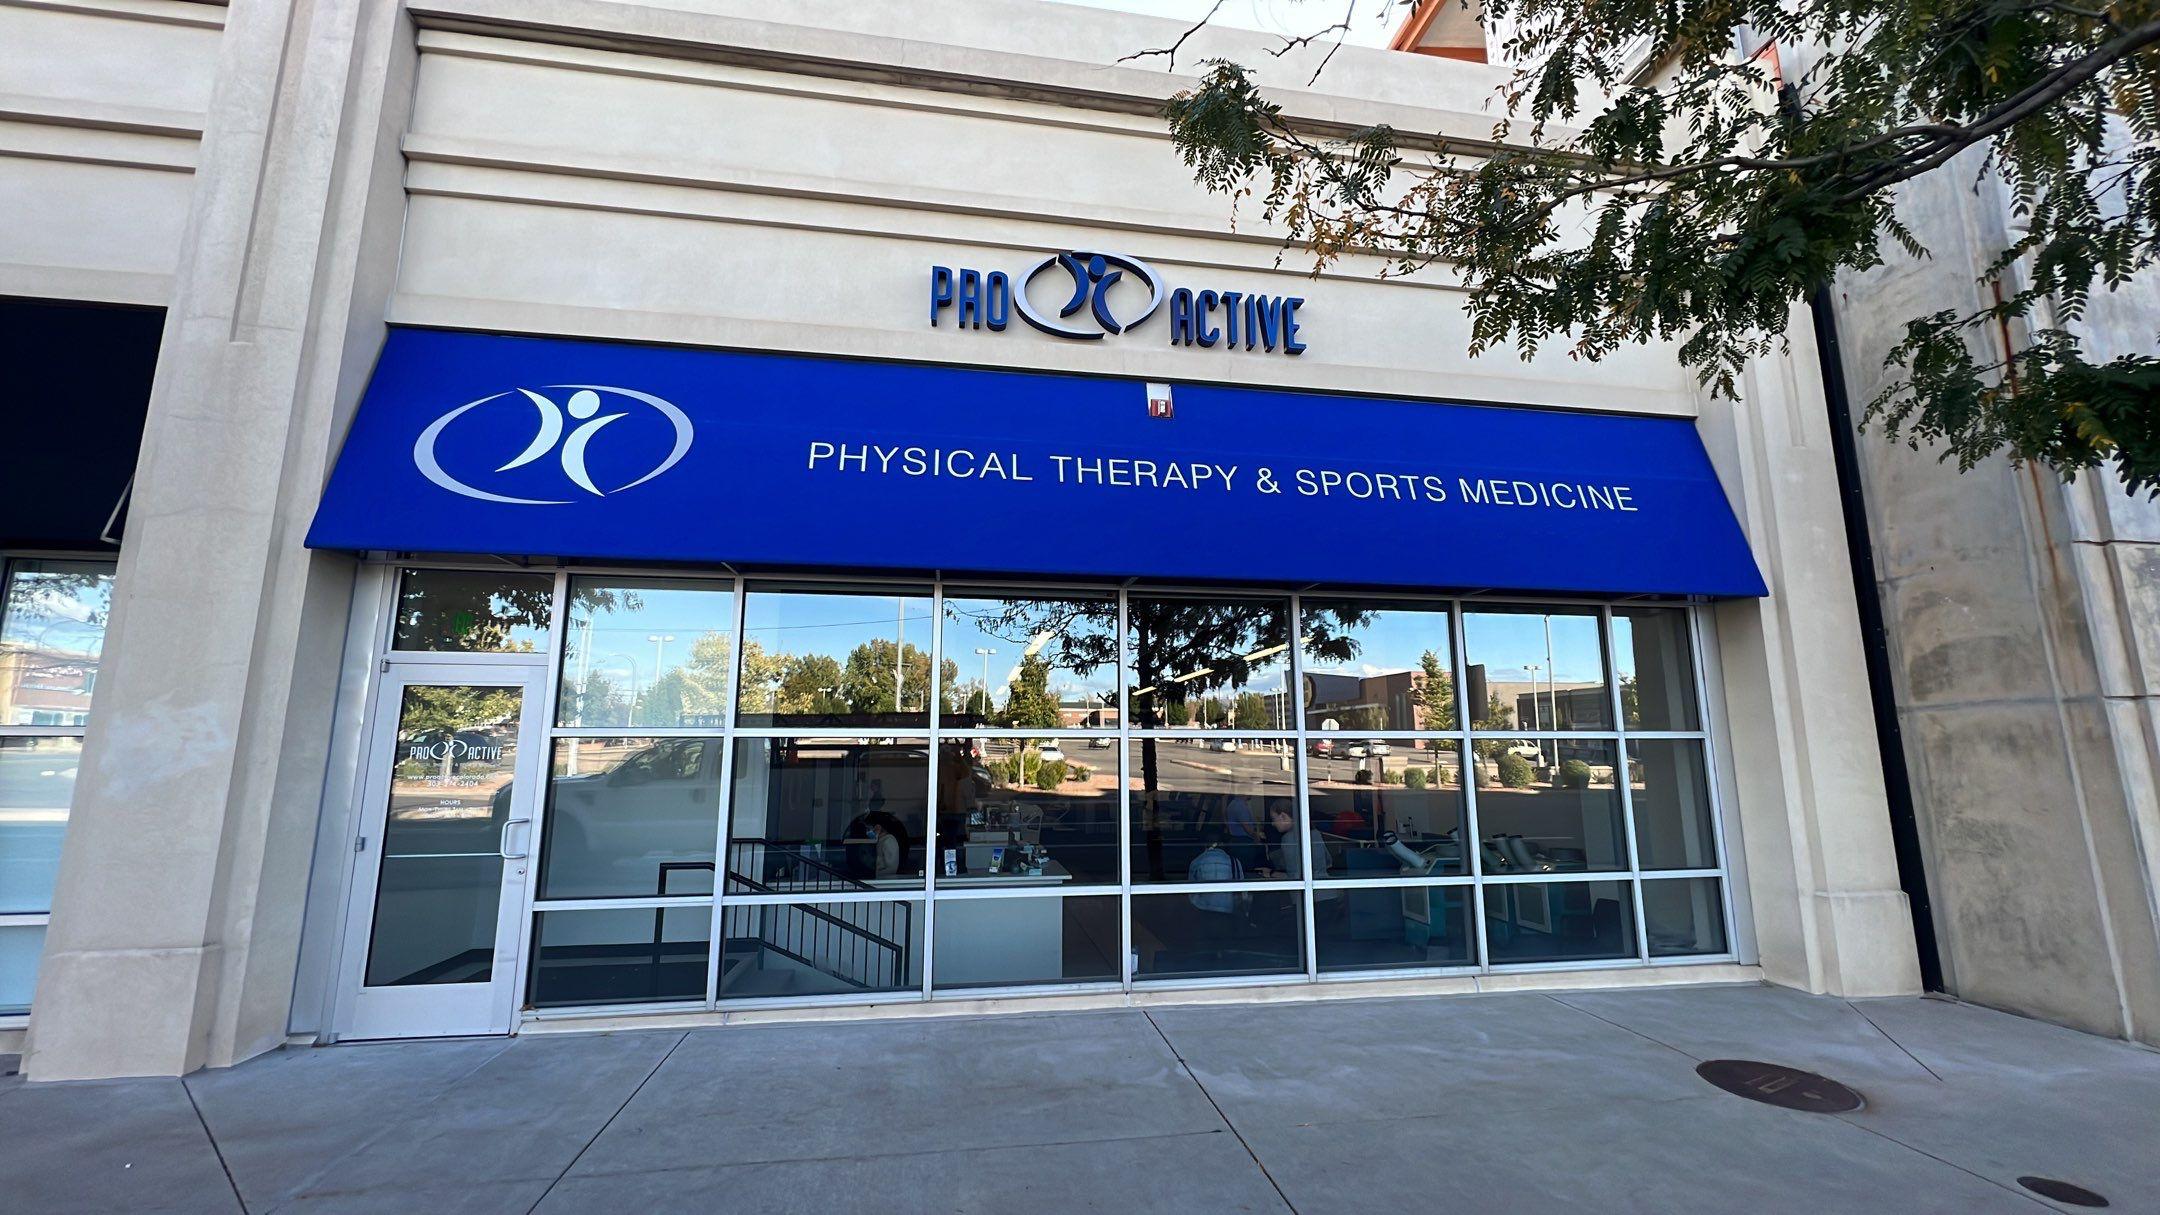 ProActive Physical Therapy
325 South Teller Street
Lakewood